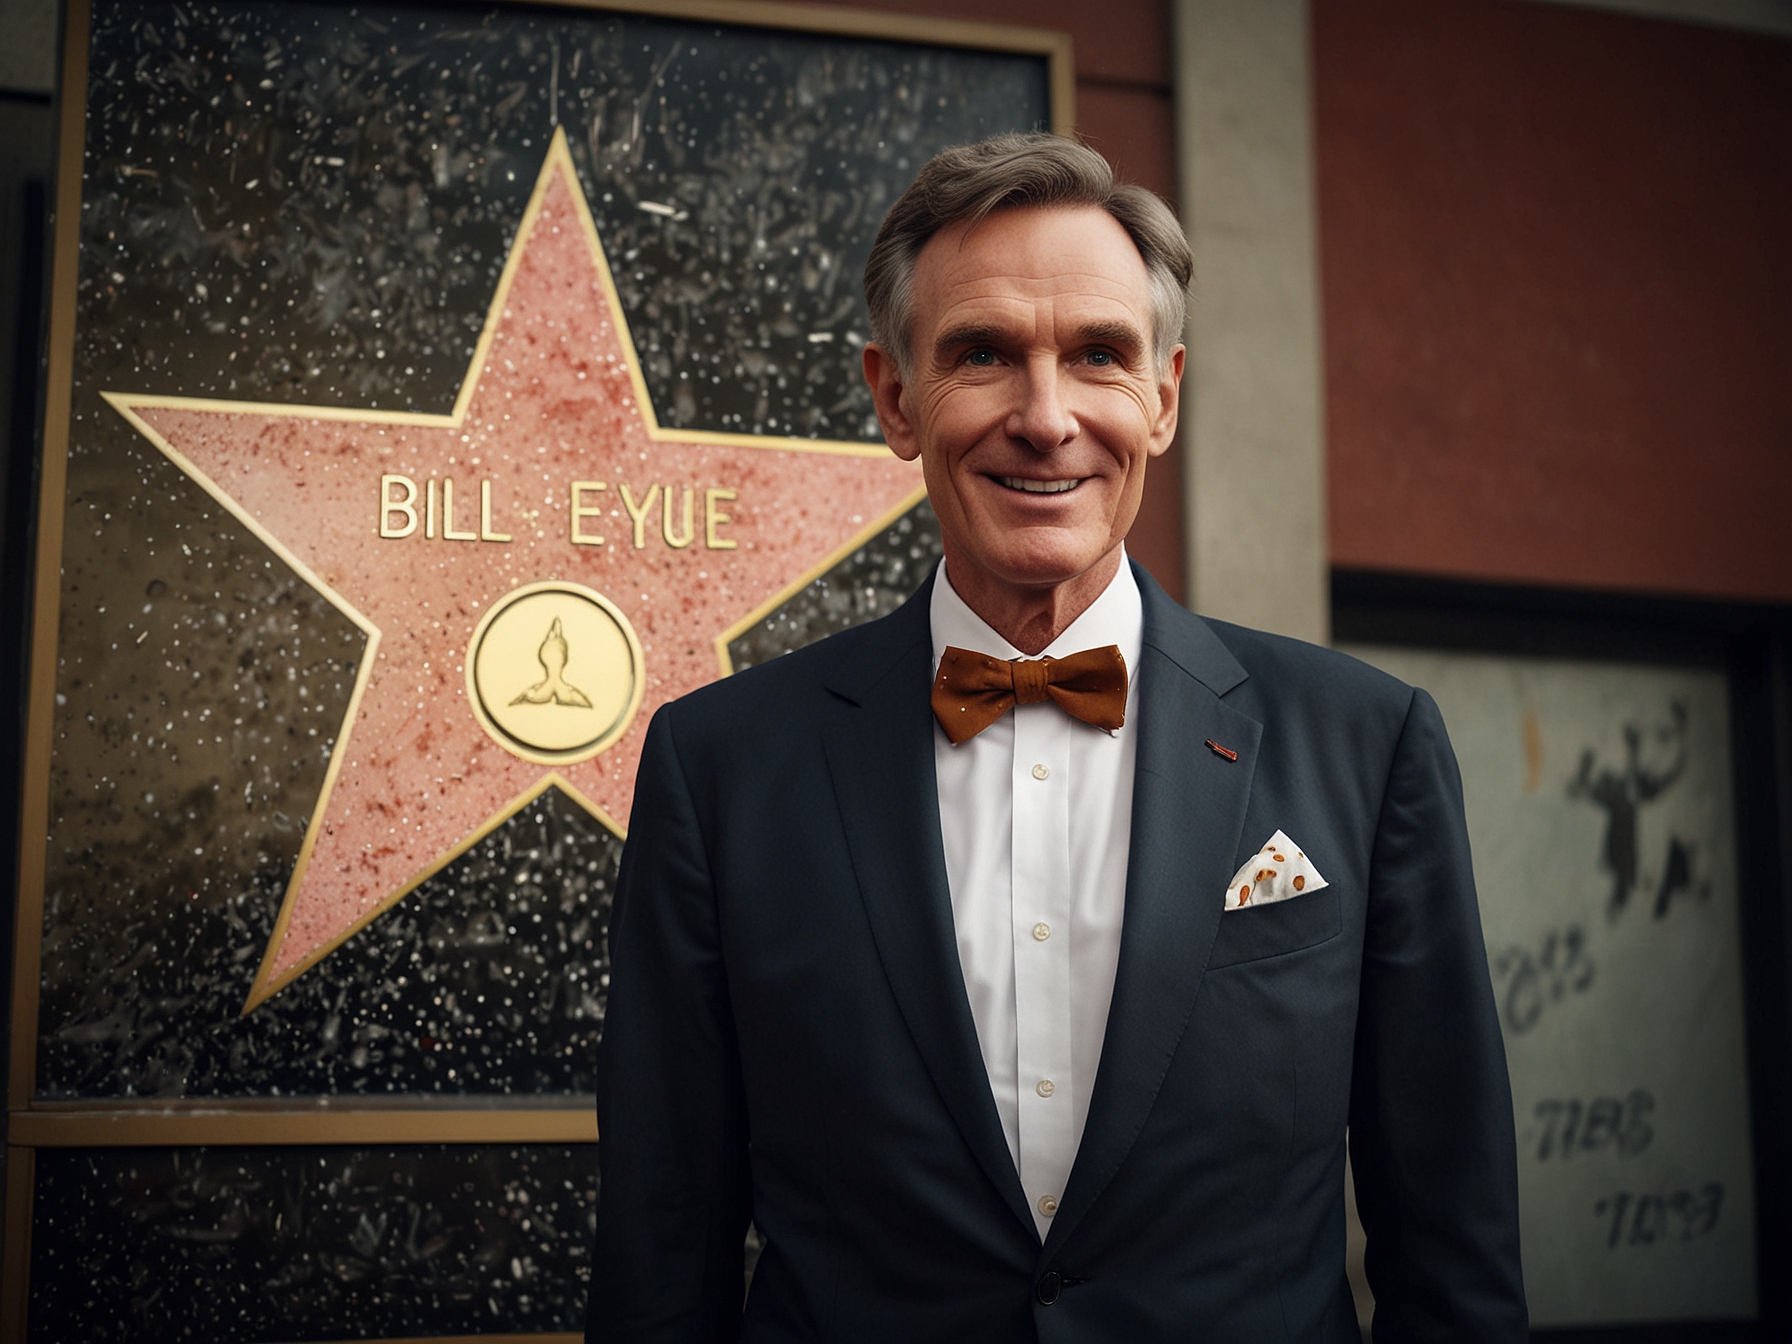 Bill Nye stands proudly next to his newly unveiled star on the Hollywood Walk of Fame, smiling and waving to fans, symbolizing his significant contributions to science and education.